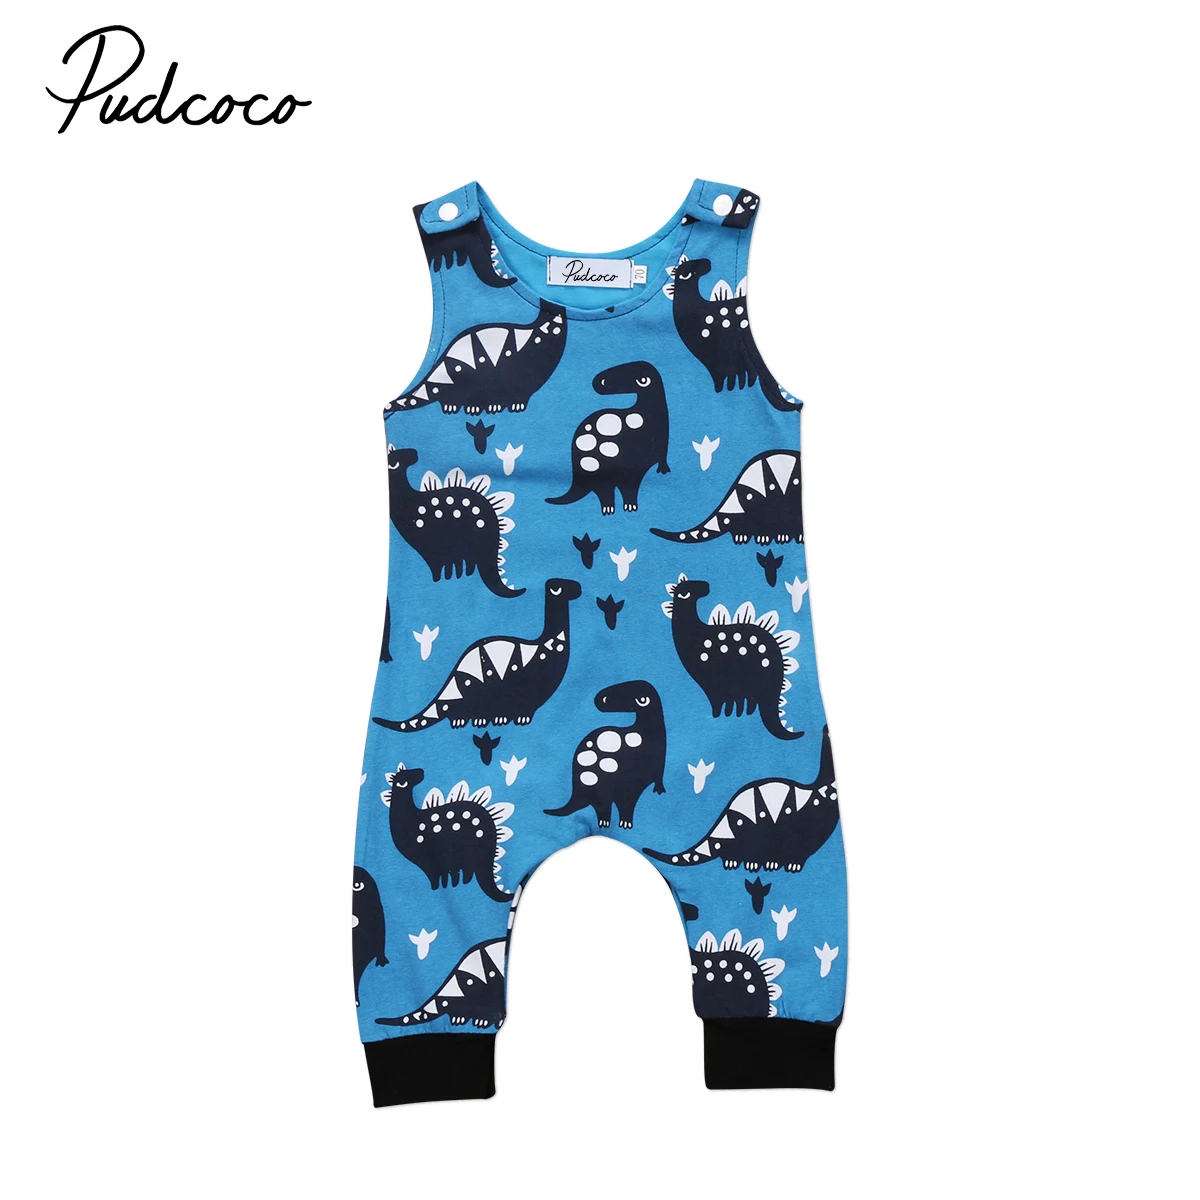 

New 2020 Pudcoco 0-18M Dinosaur Newborn Baby Boy Sleeveless Romper Blue Anime Jumpsuit Playsuit Outfit Clothes Cotton 2019